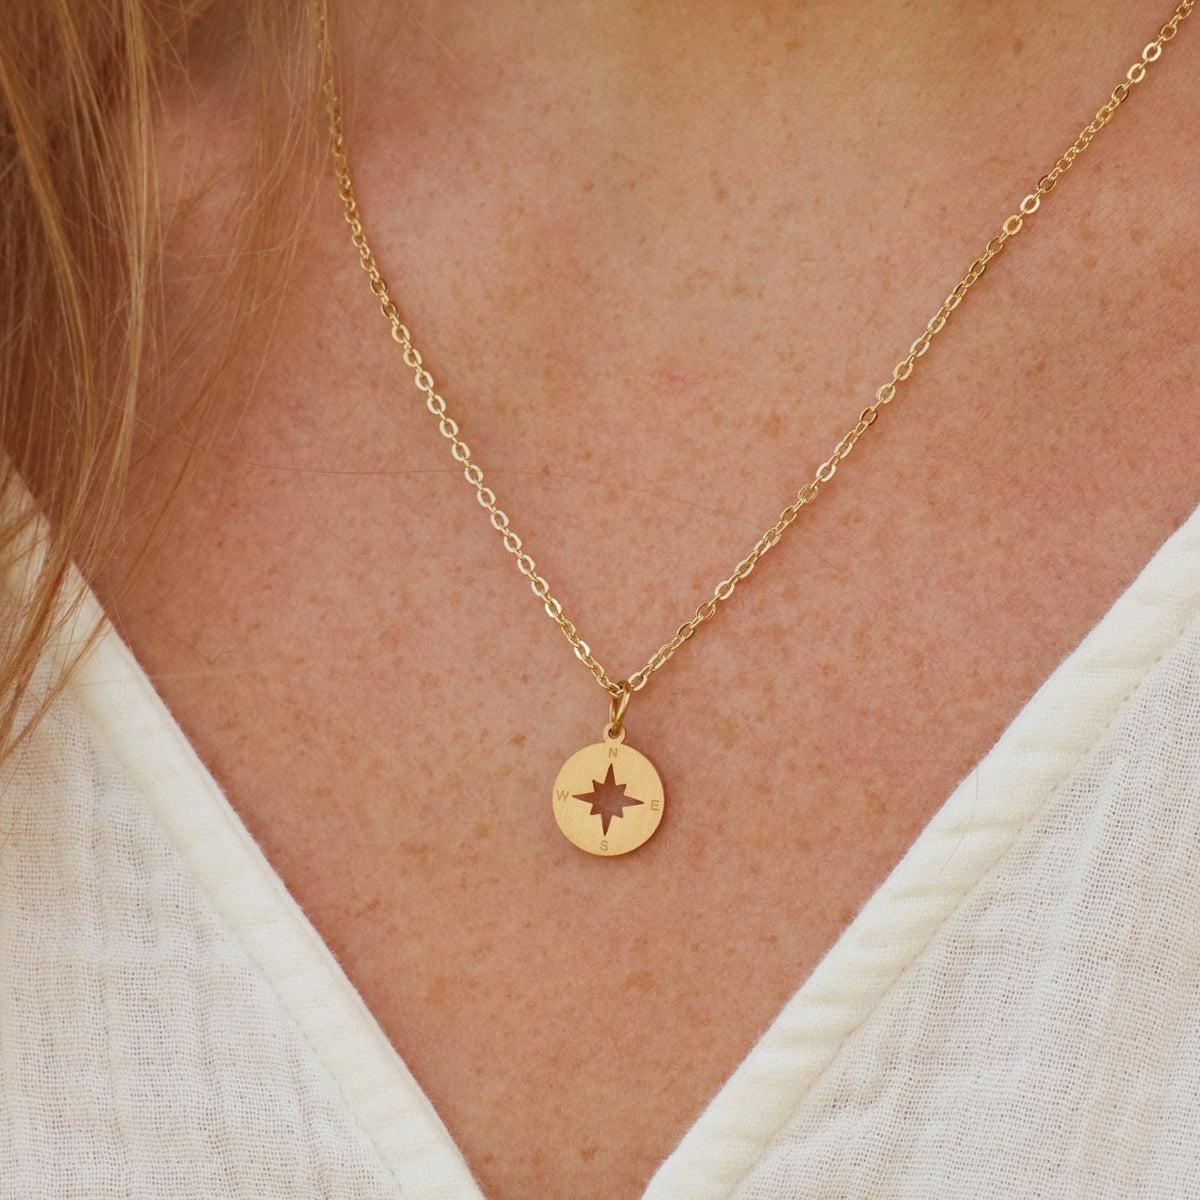 In Loving Memory of your Father | Loved Beyond Words | Compass Necklace